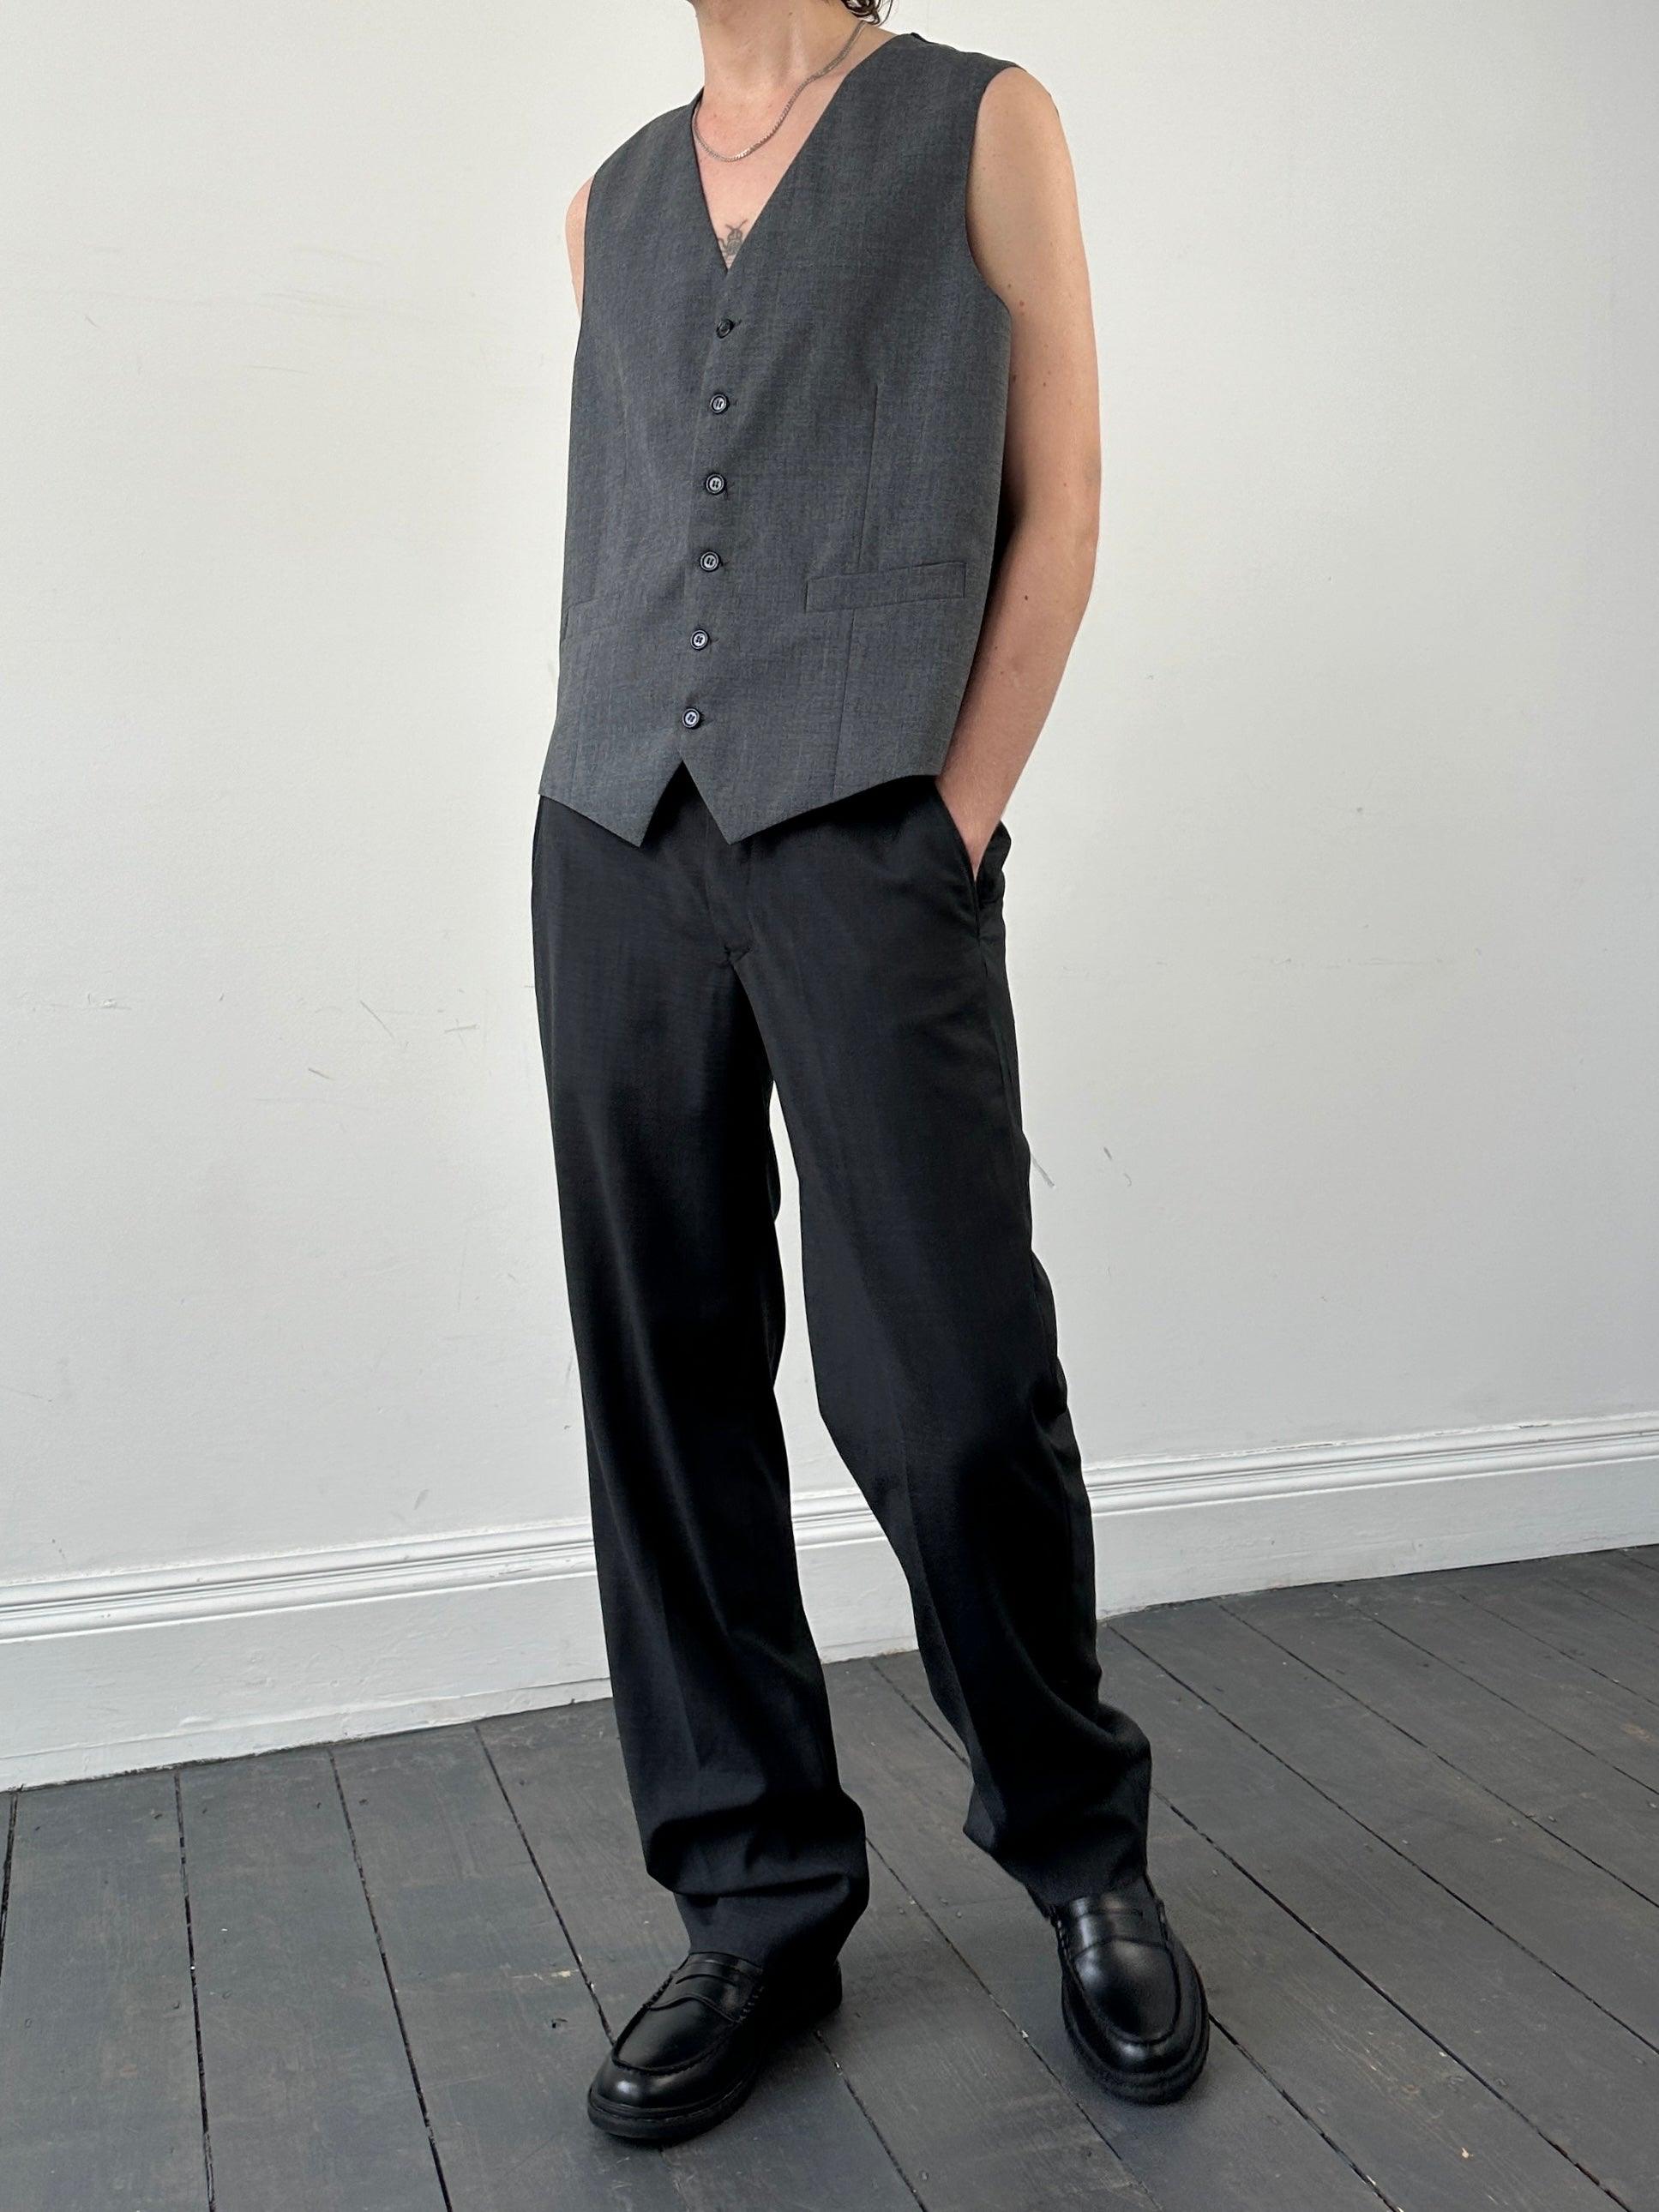 Vintage Pure Wool Tailored Waistcoat - L/XL - Known Source